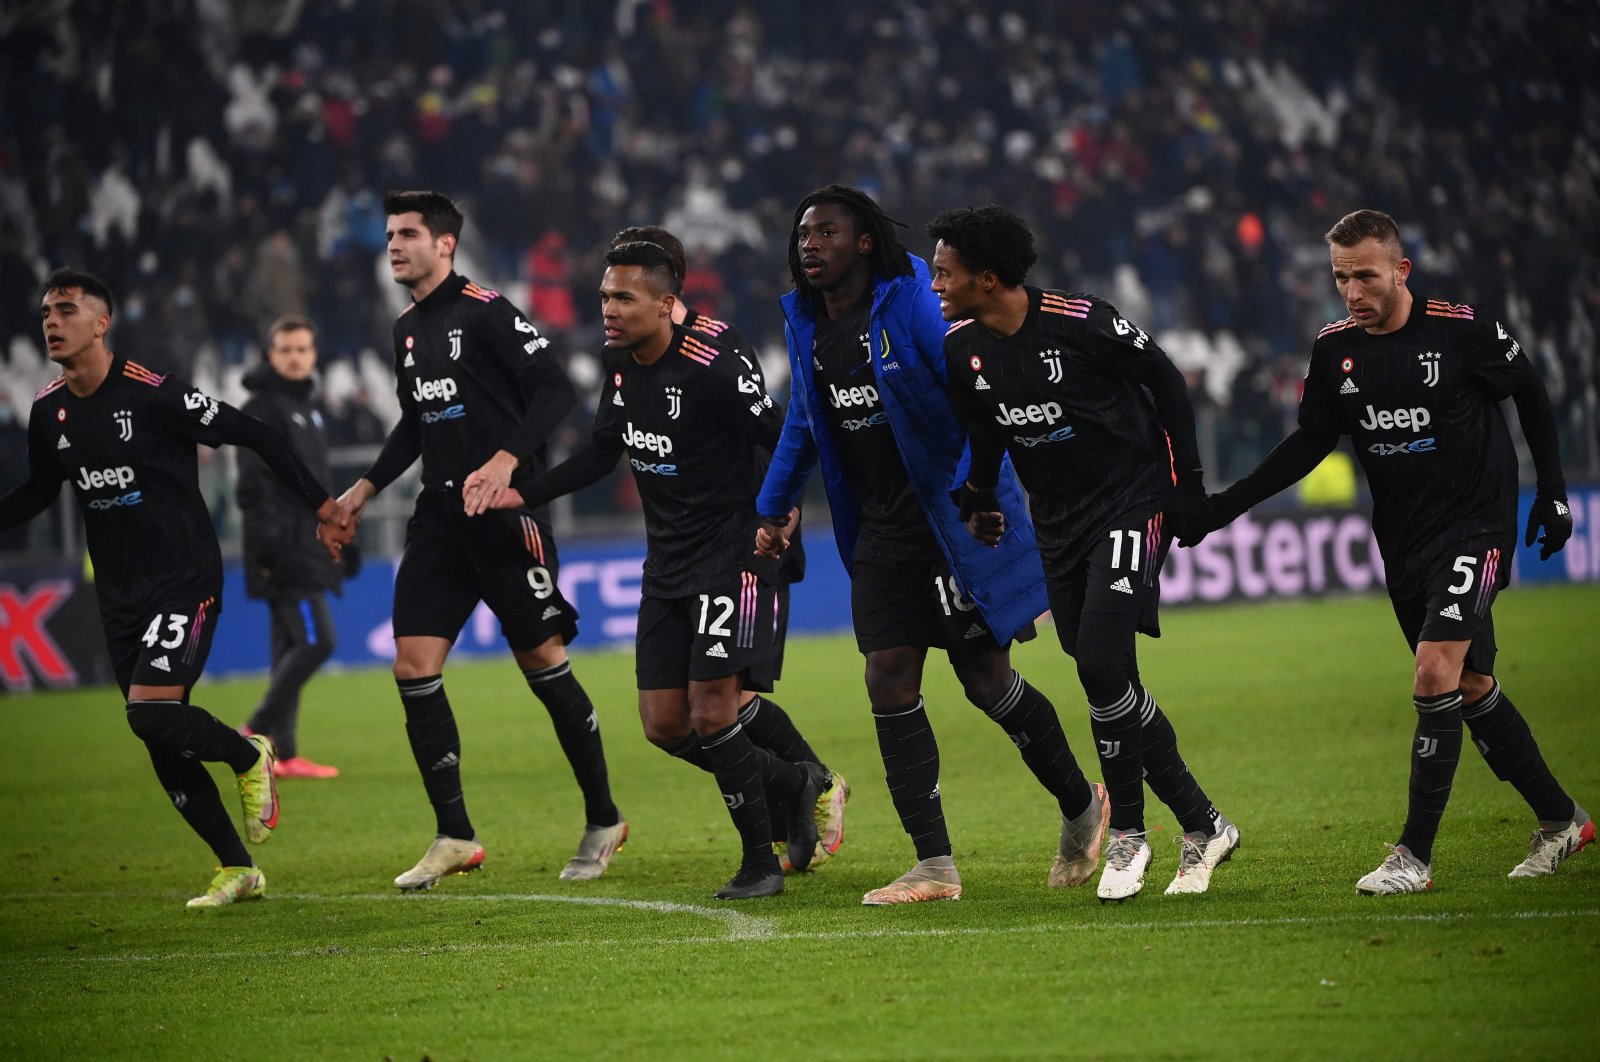 Juventus players celebrate after the Champions League Group H match against Malmo, in Turin, Italy, Dec. 8, 2021. (AFP Photo)